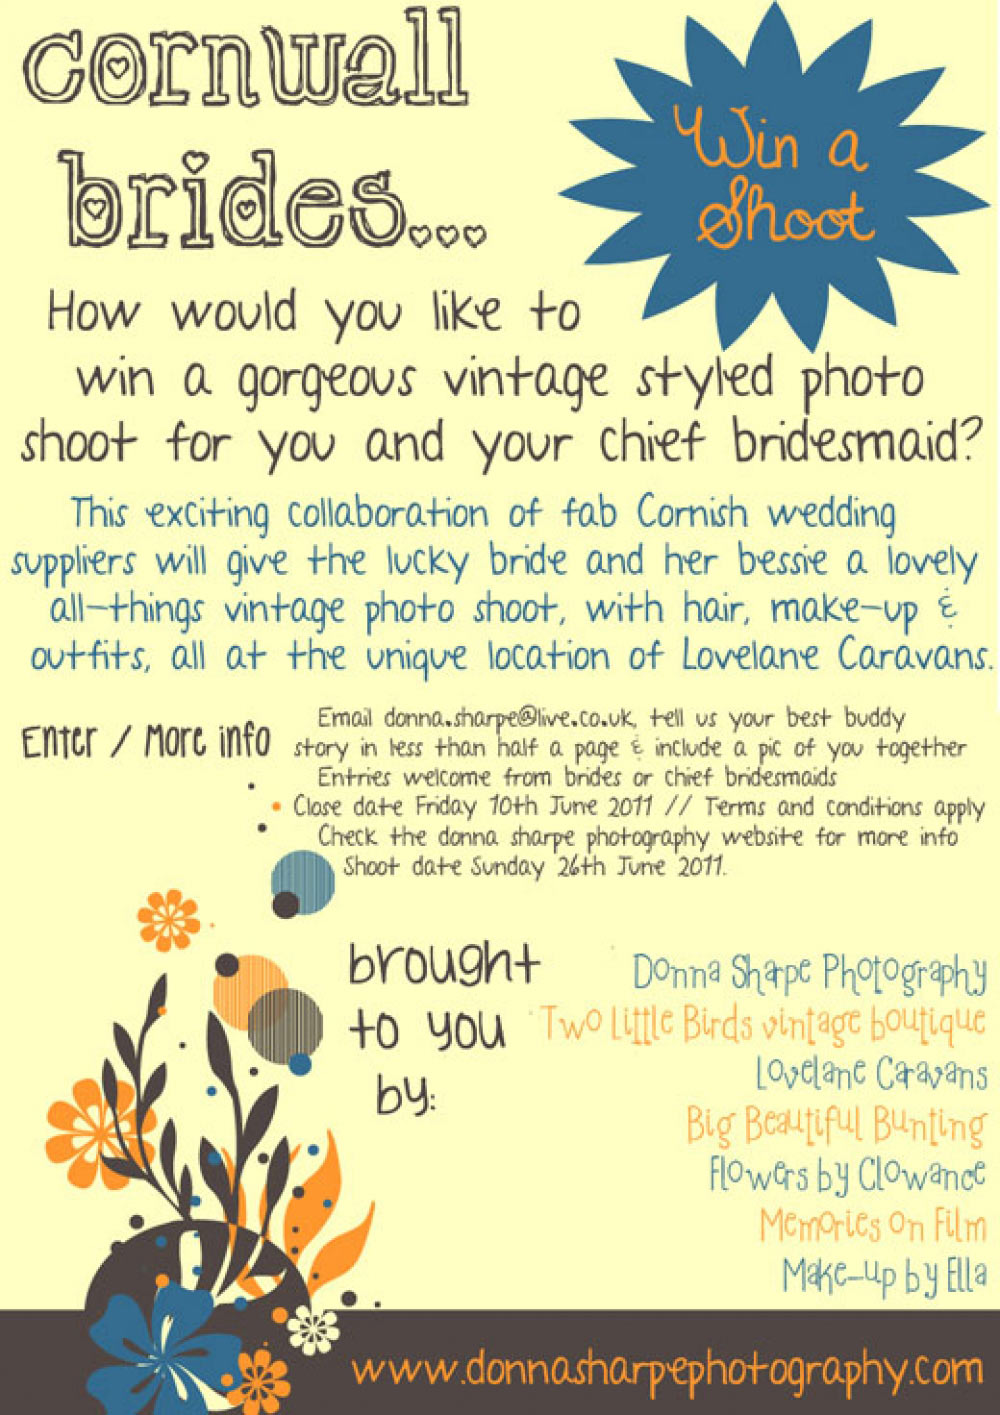 Win a Vintage Styled Photo Shoot